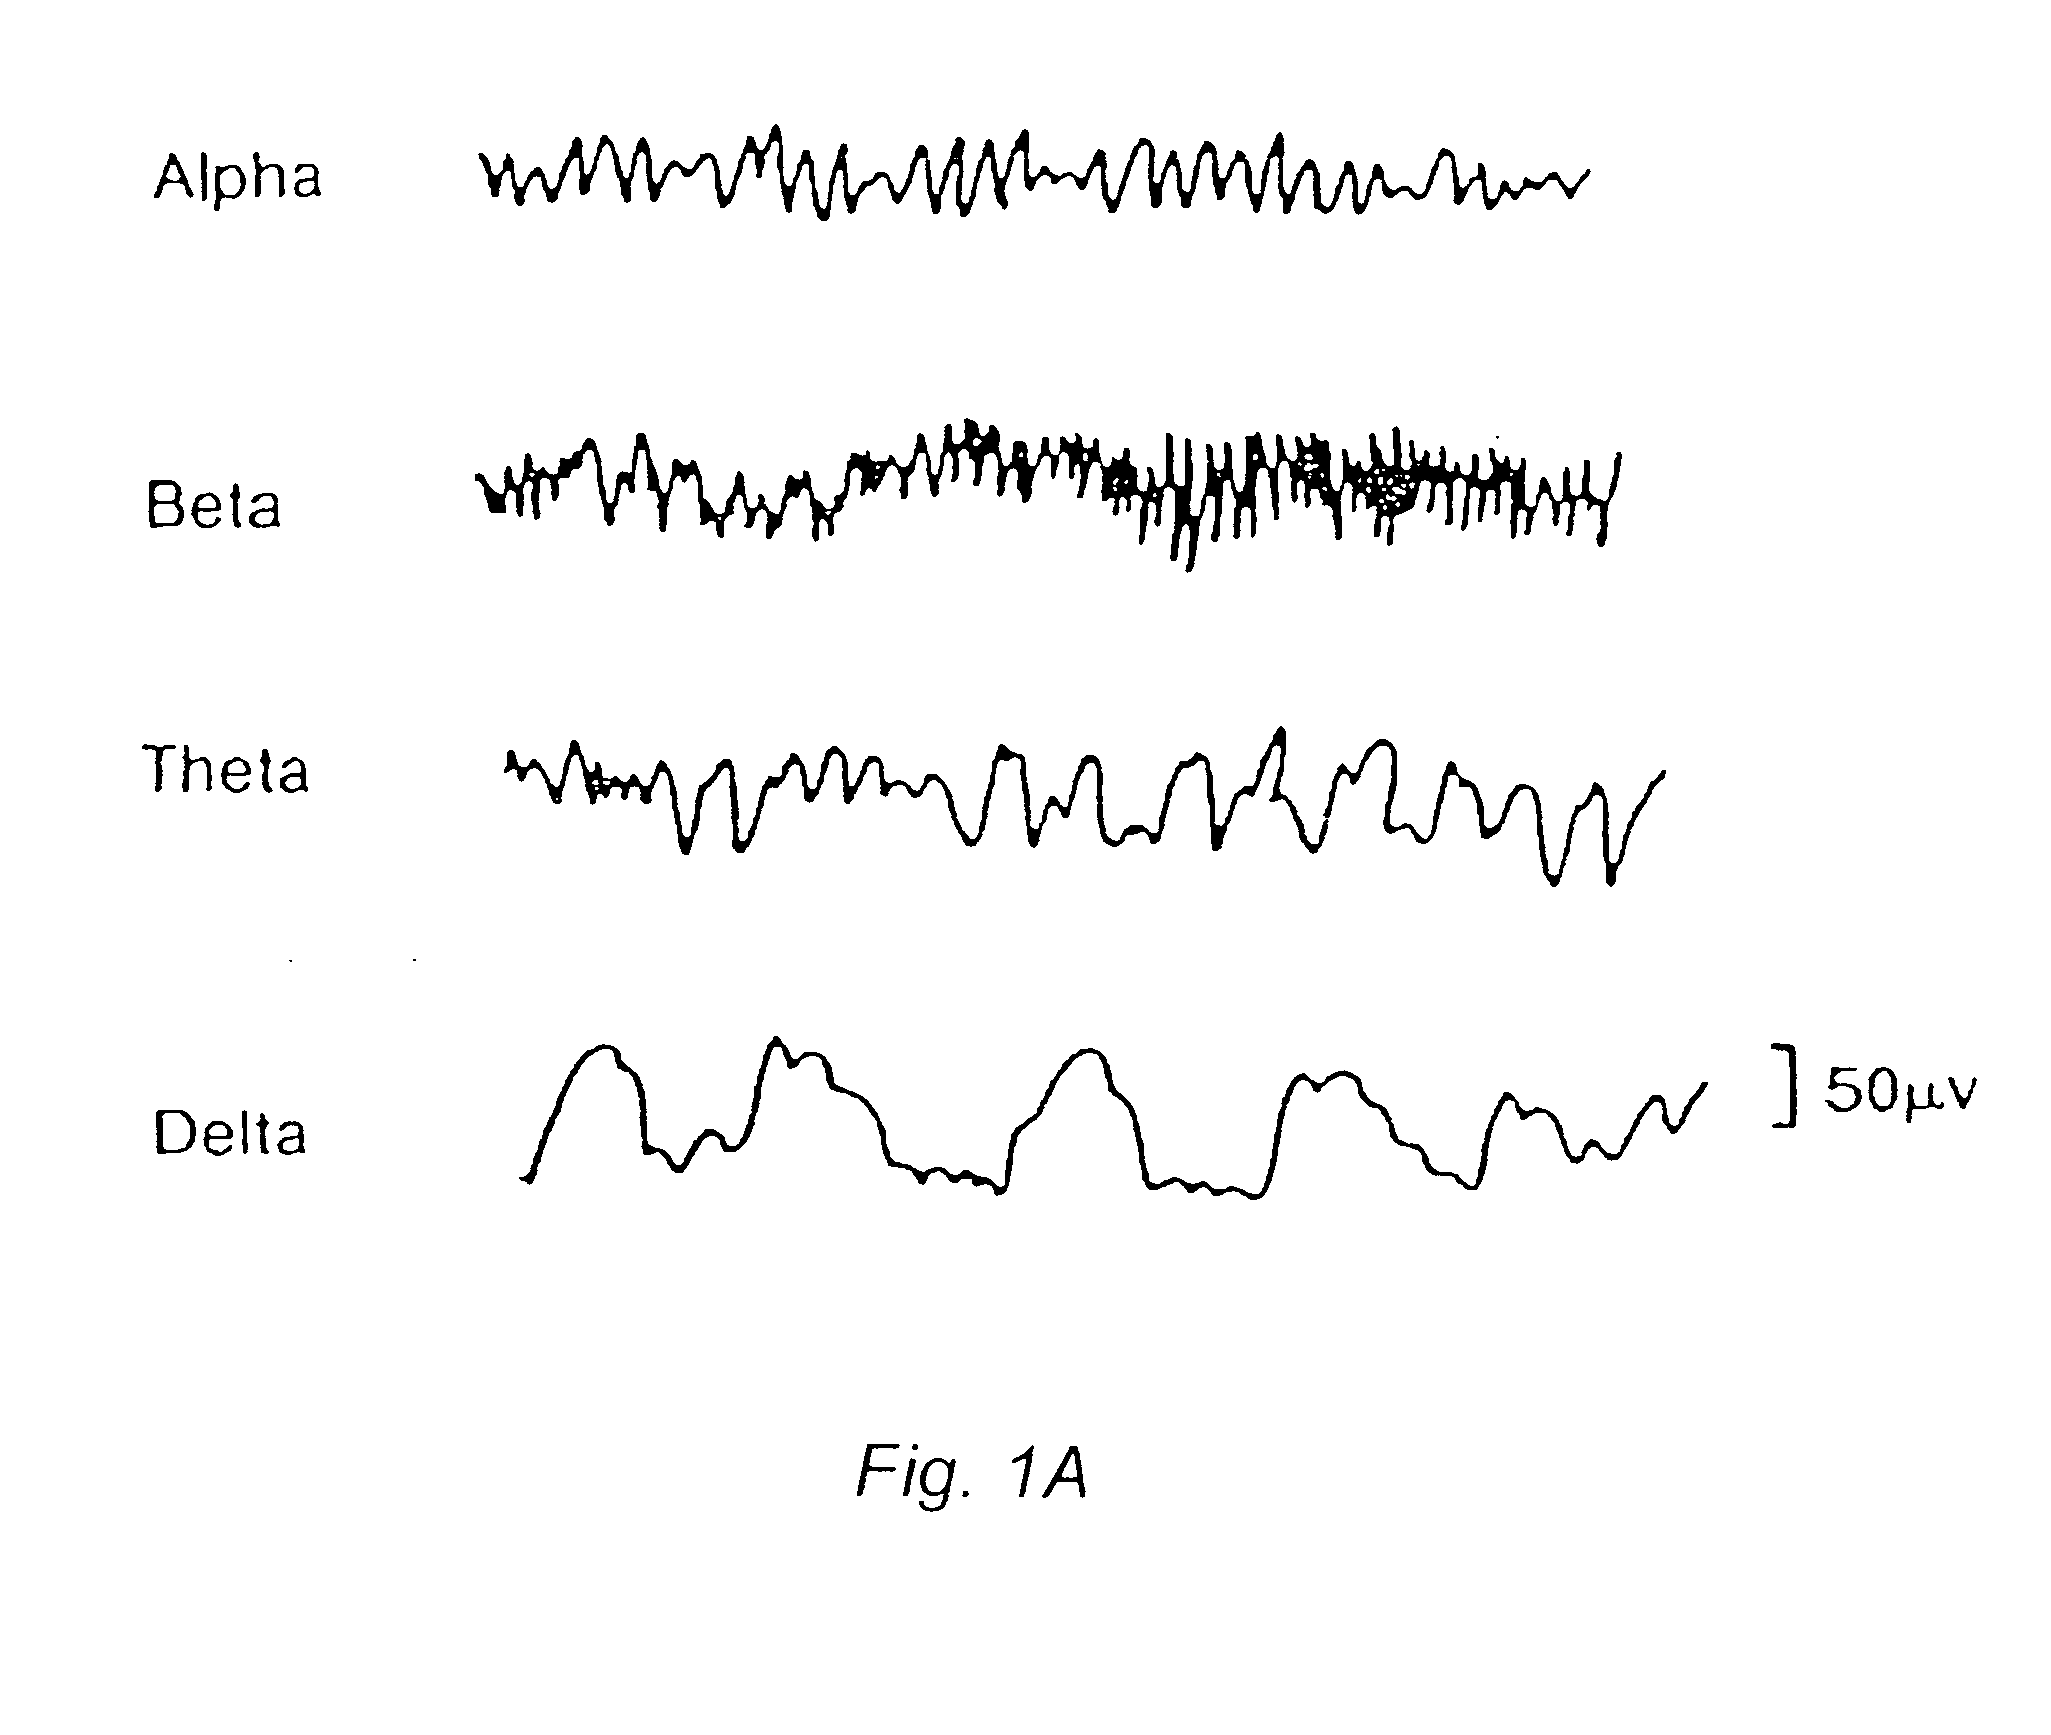 Method and system for analyzing and presenting an Electroencephalogram (EEG)